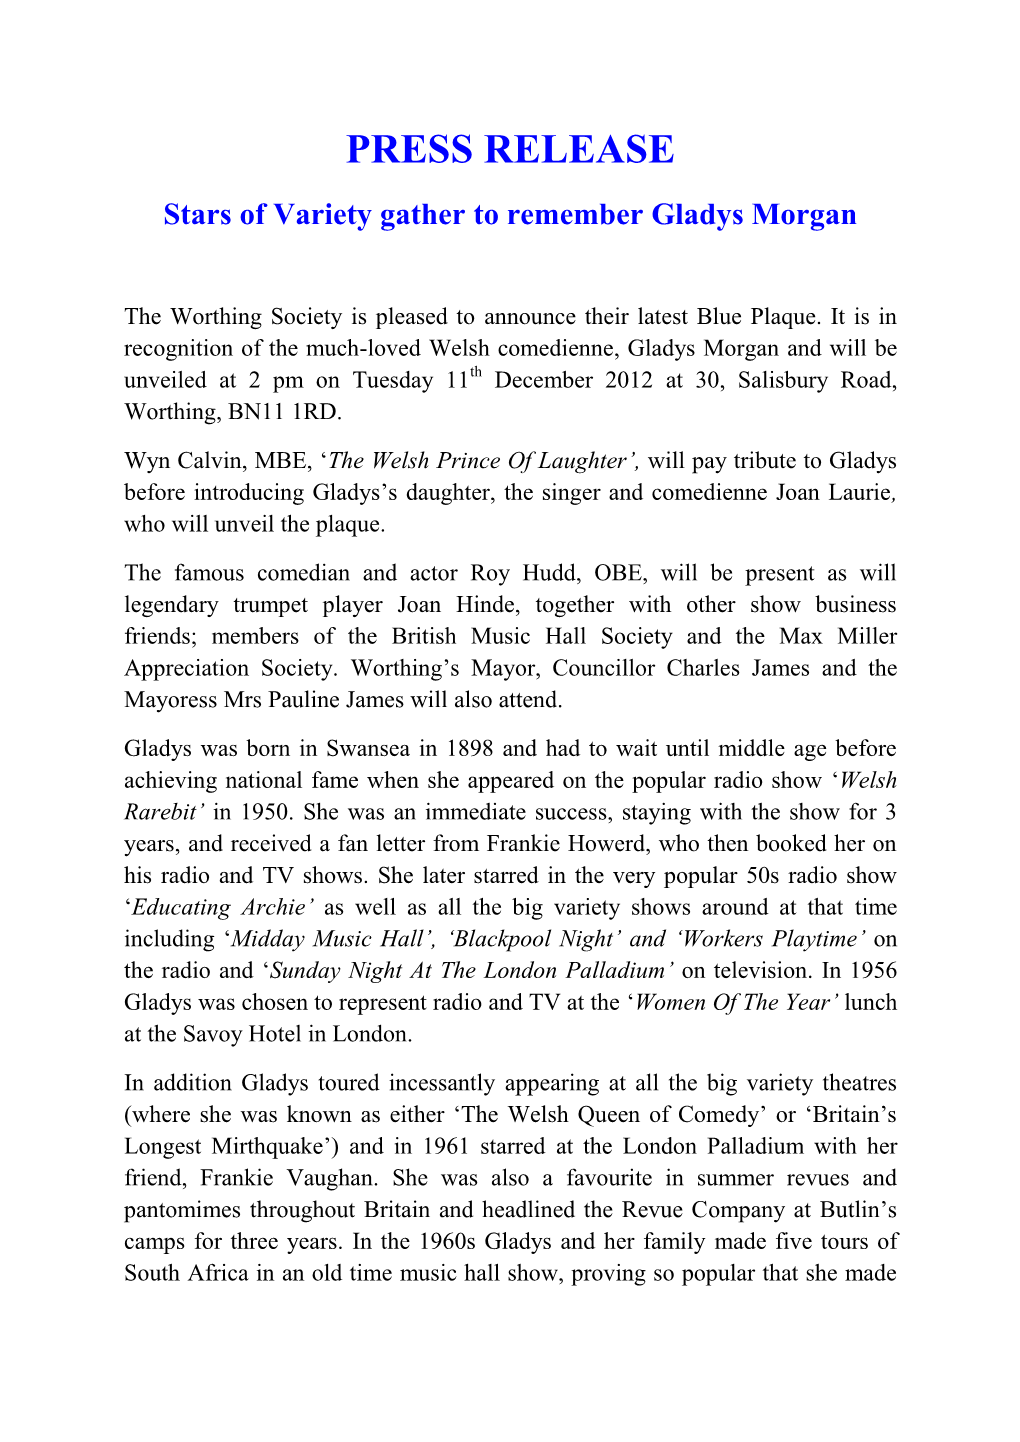 PRESS RELEASE Stars of Variety Gather to Remember Gladys Morgan